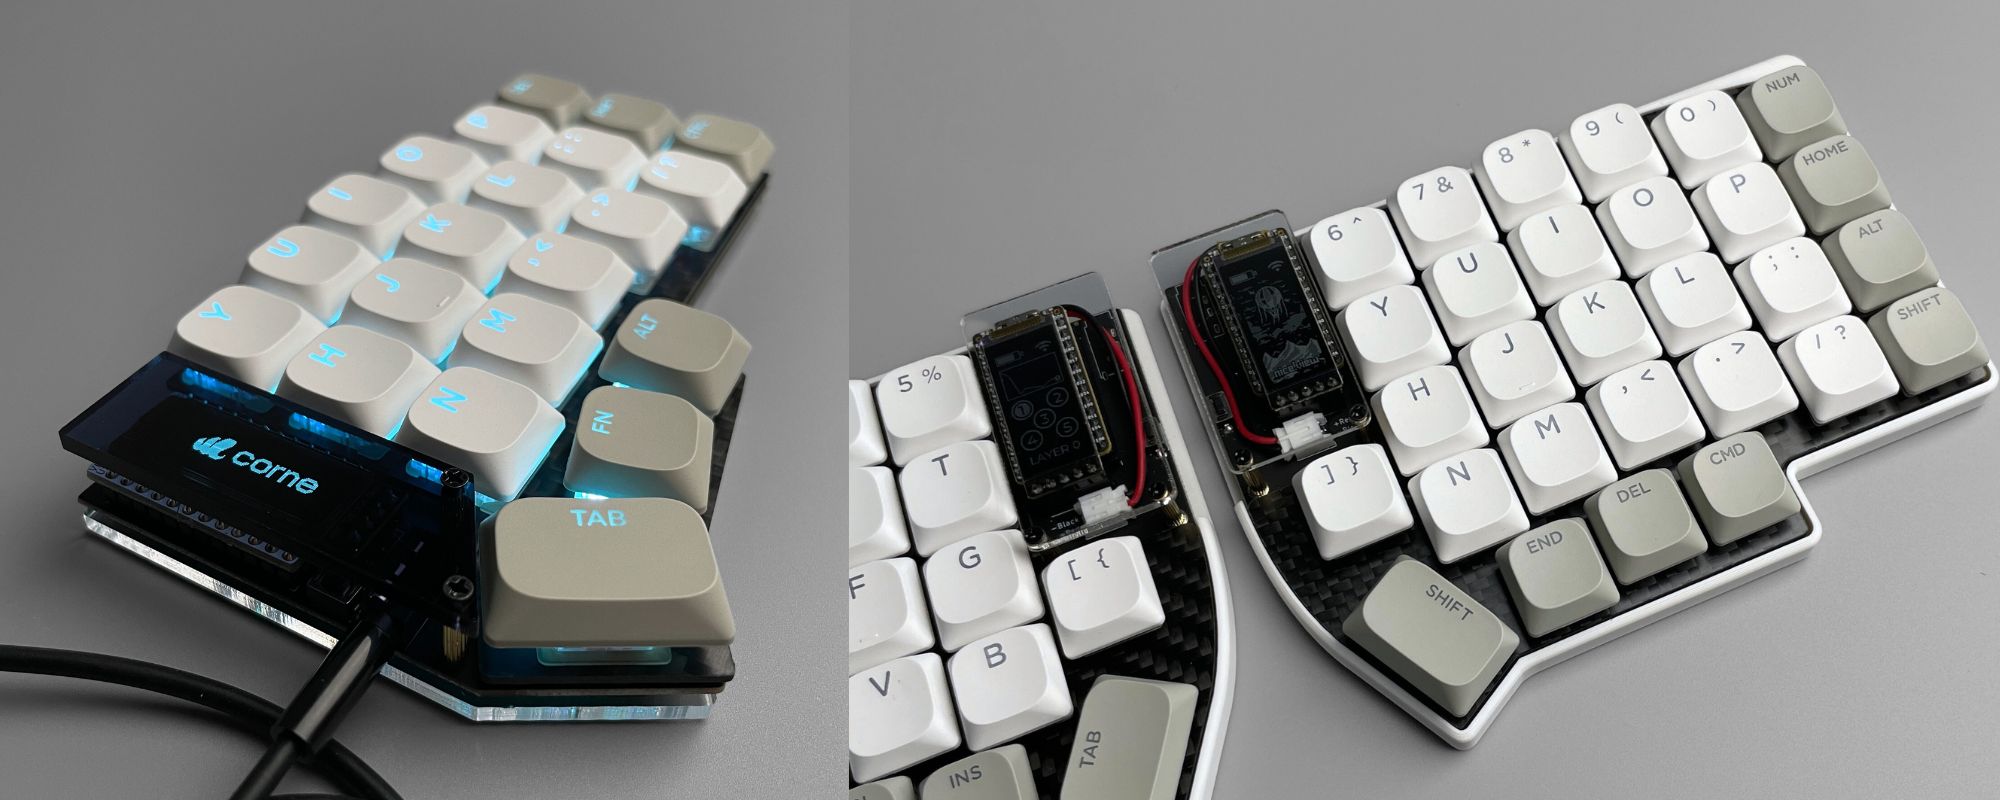 Corne crkbd and Allium58 keyboards with GLP key switches